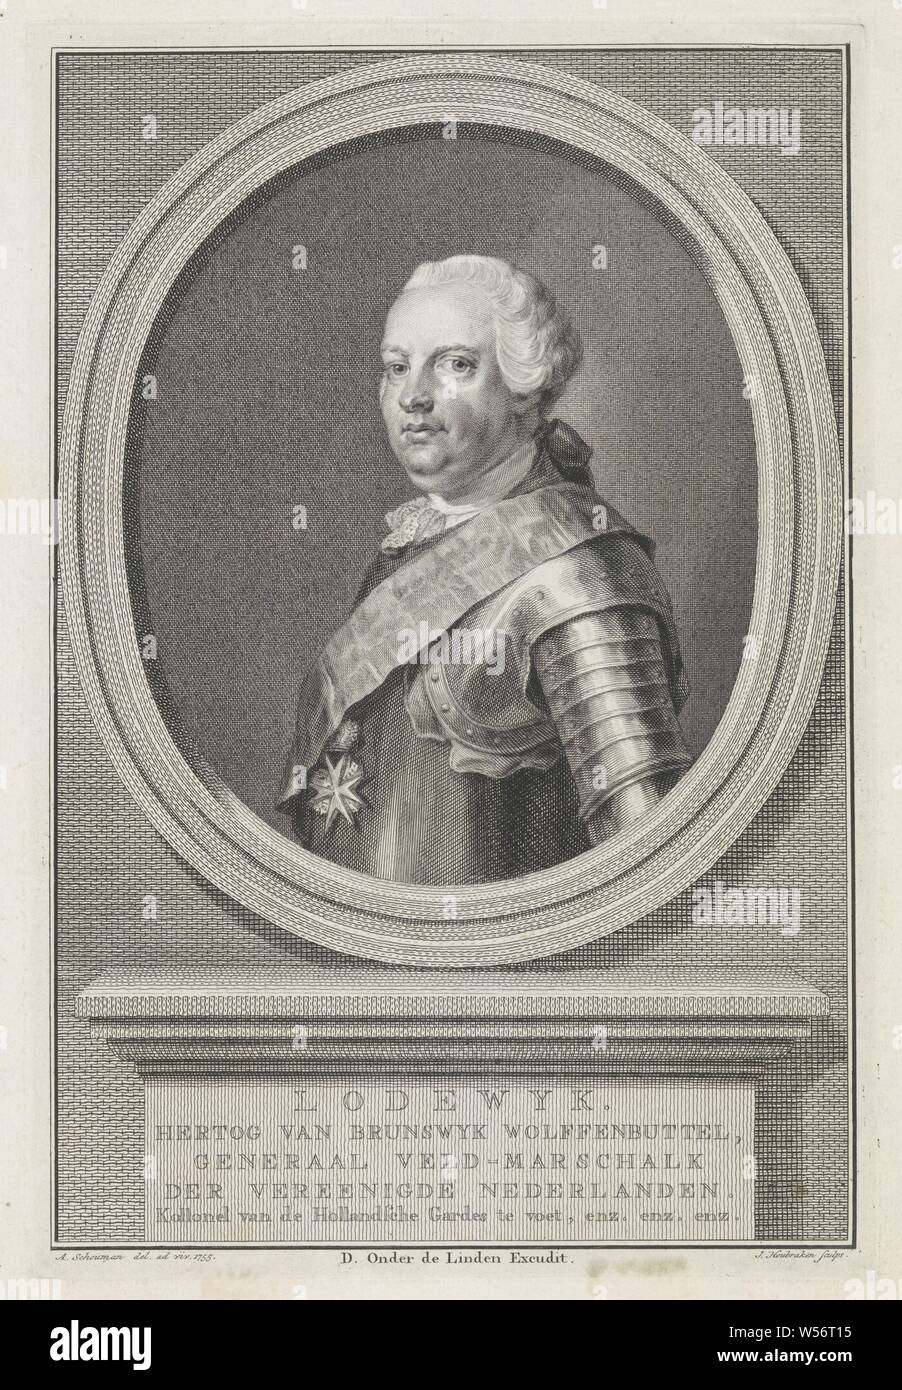 Portrait of Louis of Brunswijk-Wolfenbüttel, Portrait of Louis in an oval. In a frame his name and titles, Ludwig Ernst von Braunschweig-Wolfenbüttel, Jacob Houbraken (mentioned on object), Amsterdam, 1755, paper, engraving, h 269 mm × w 182 mm Stock Photo